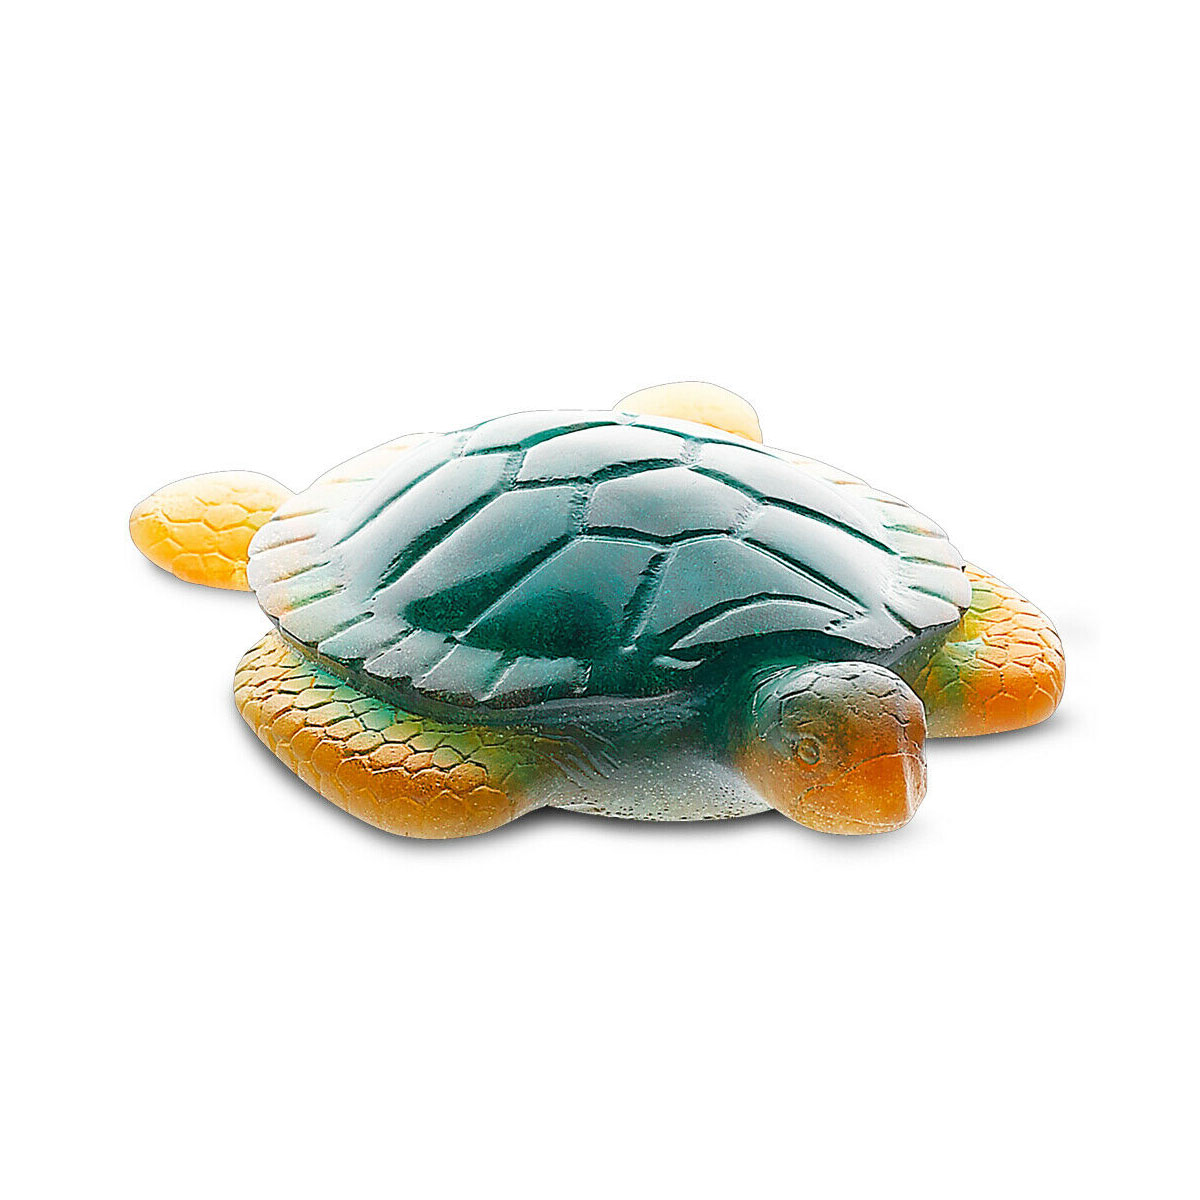 Daum Sea Turtle in Green and Amber Sculpture